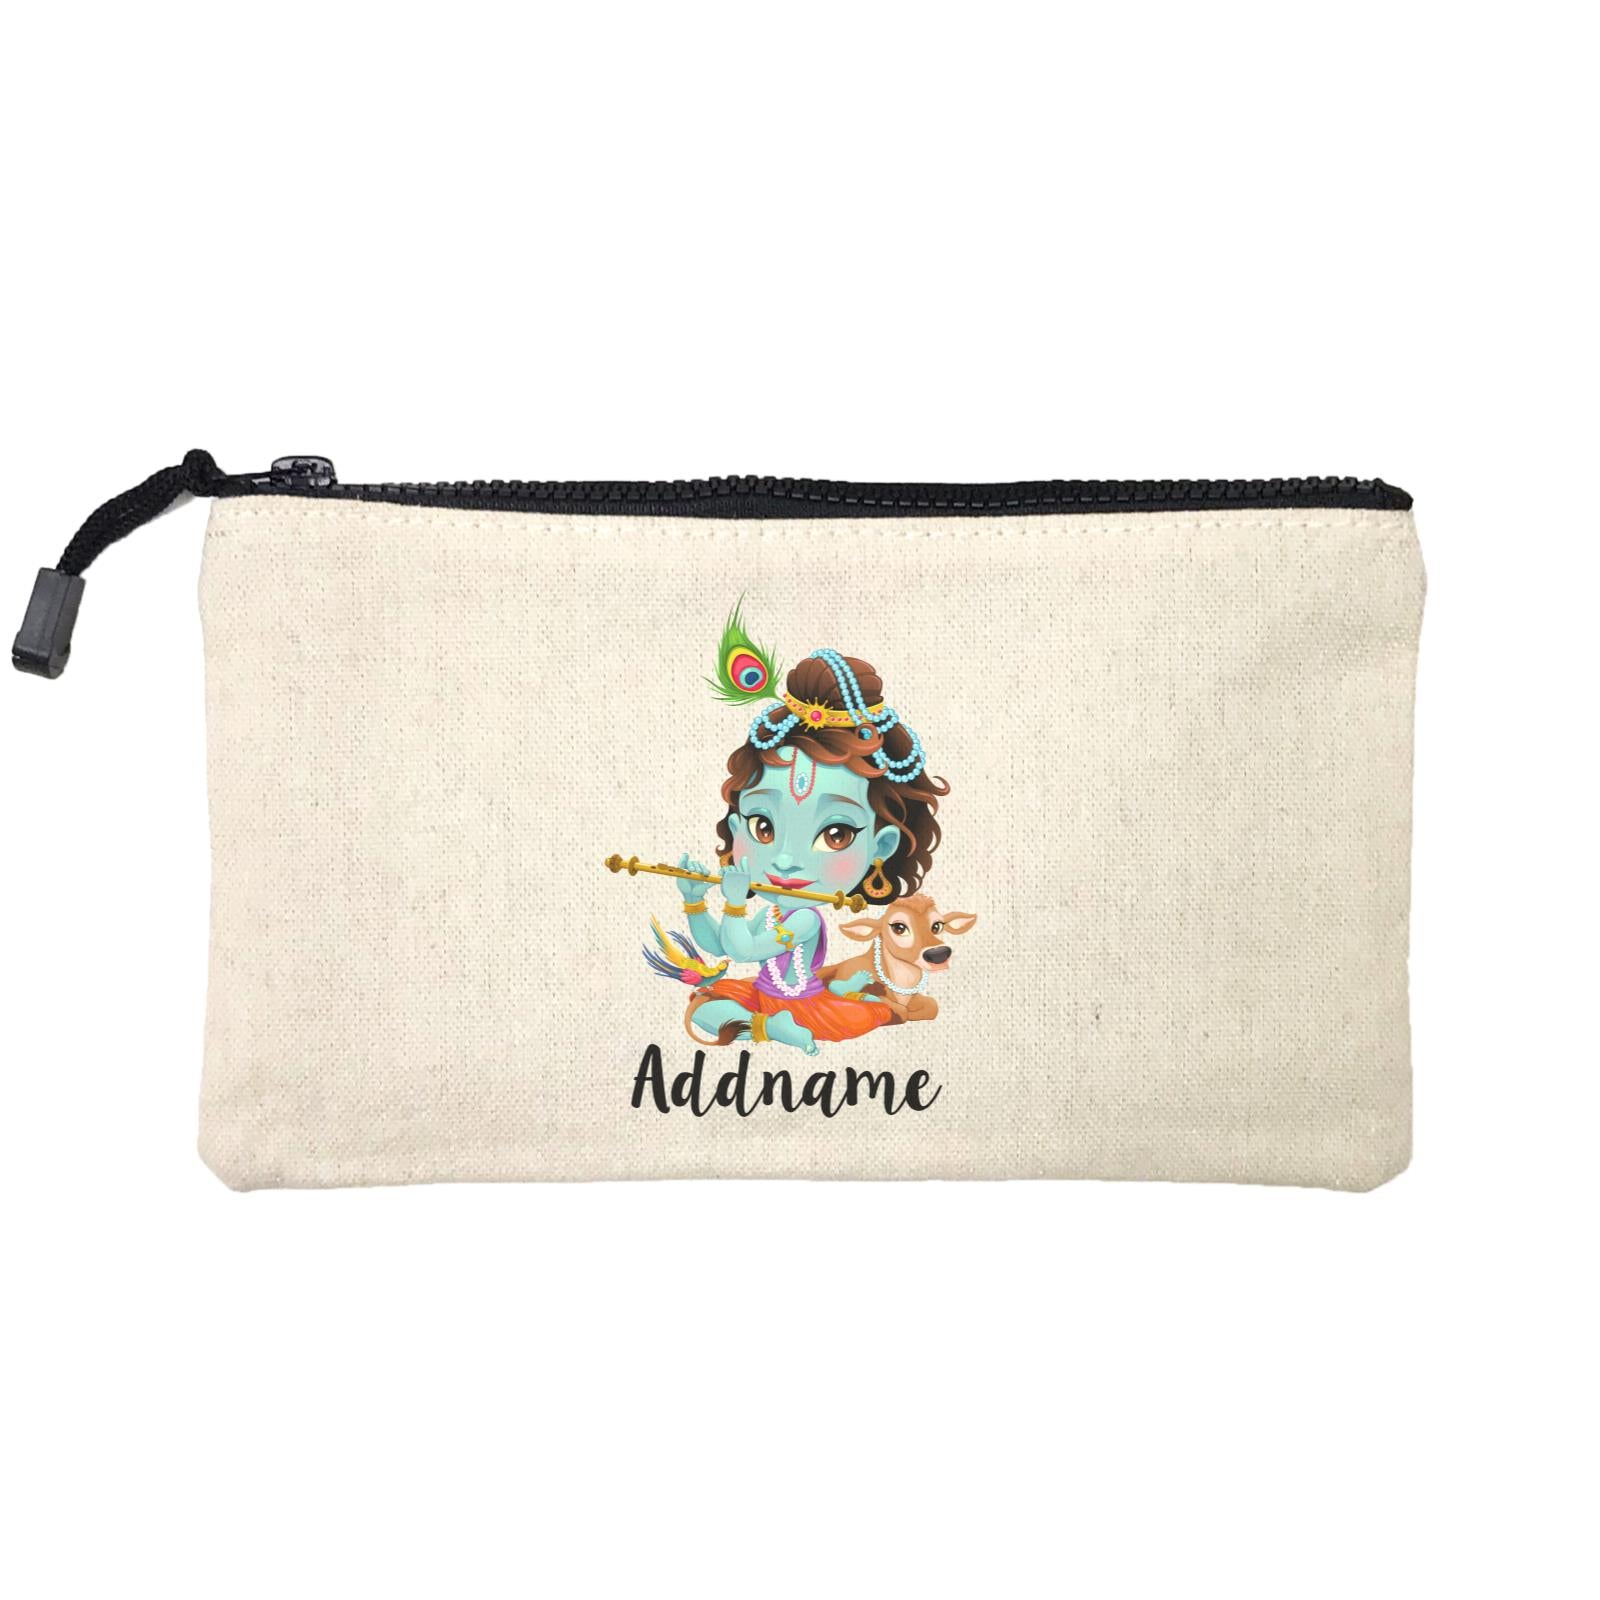 Artistic Krishna Playing Flute with Cow Addname Mini Accessories Stationery Pouch